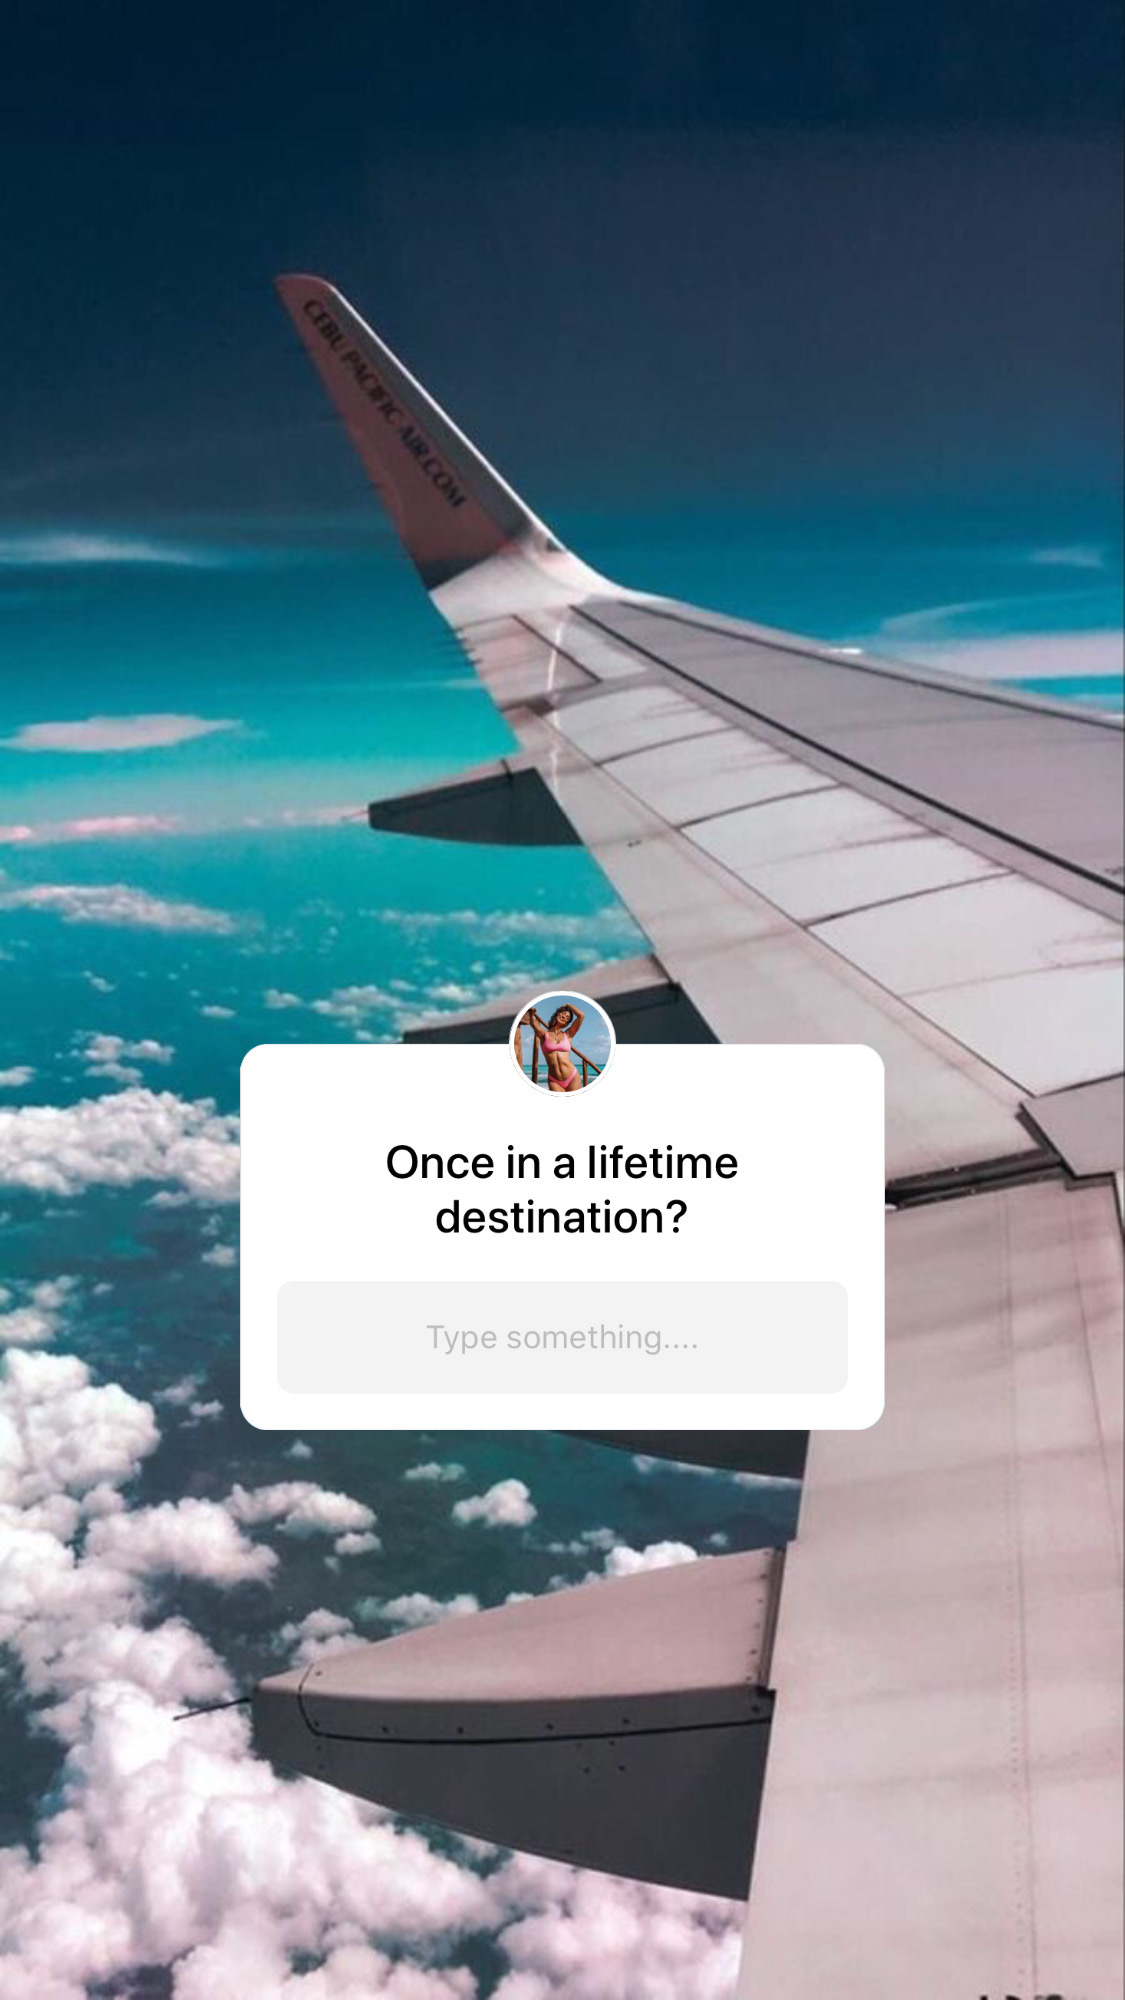 Asking my Instagram followers about their dream once in a lifetime travel destination